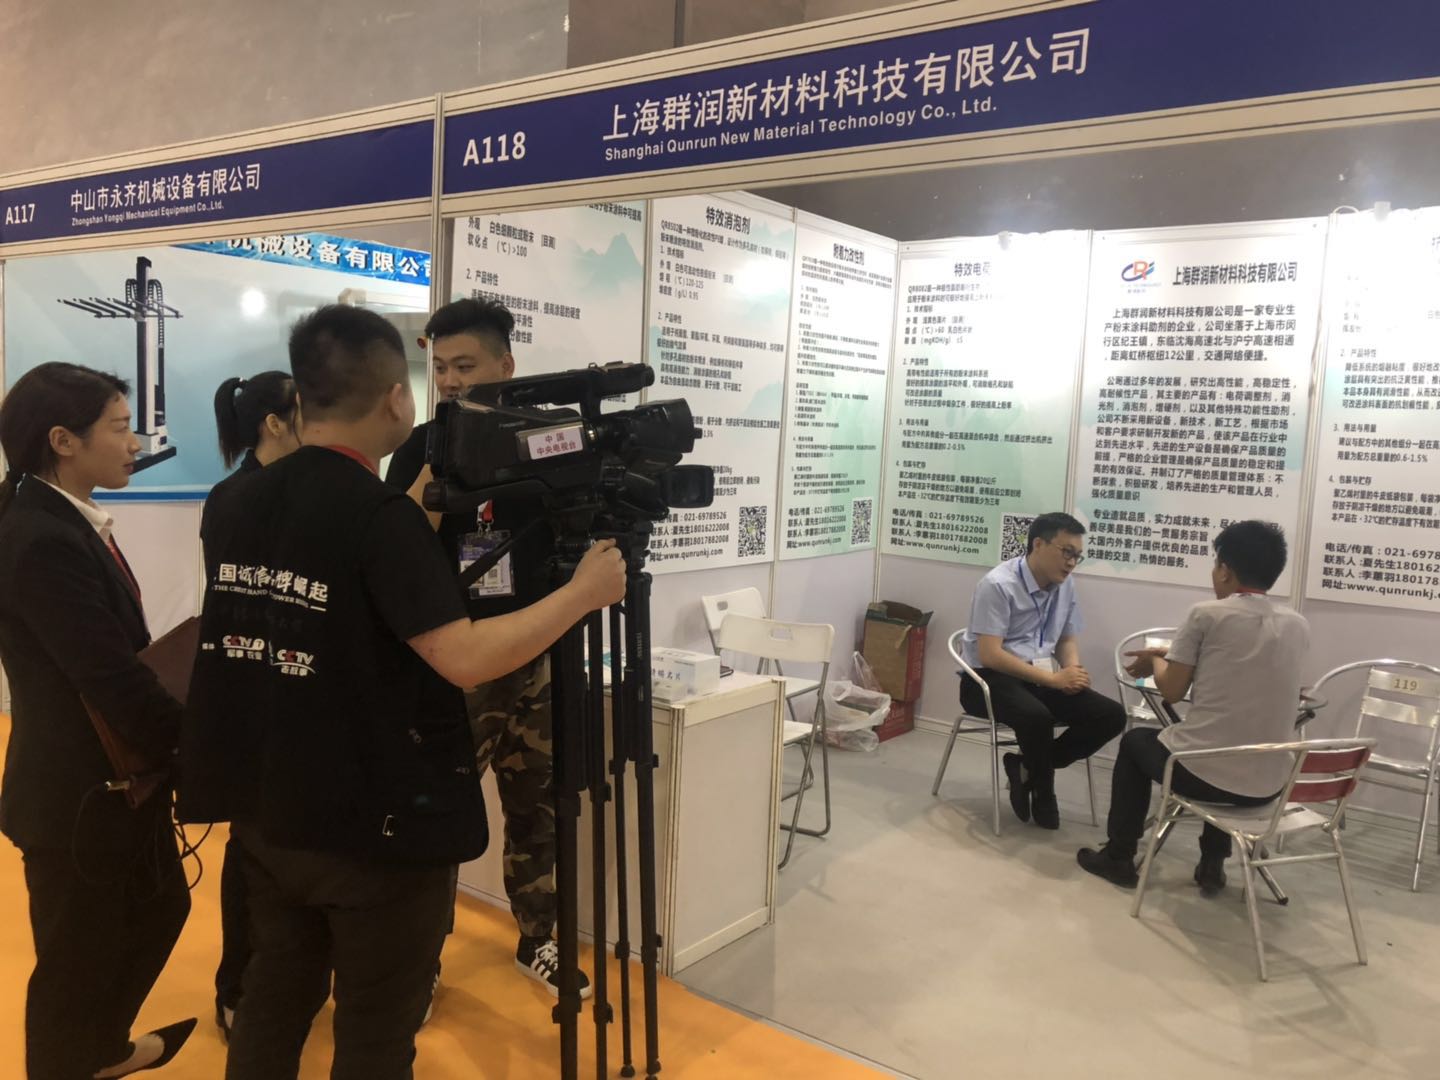 Qungrun New Materials Will Participate in 2019Chinaplas, booth NO. A118, Welcome to visit!